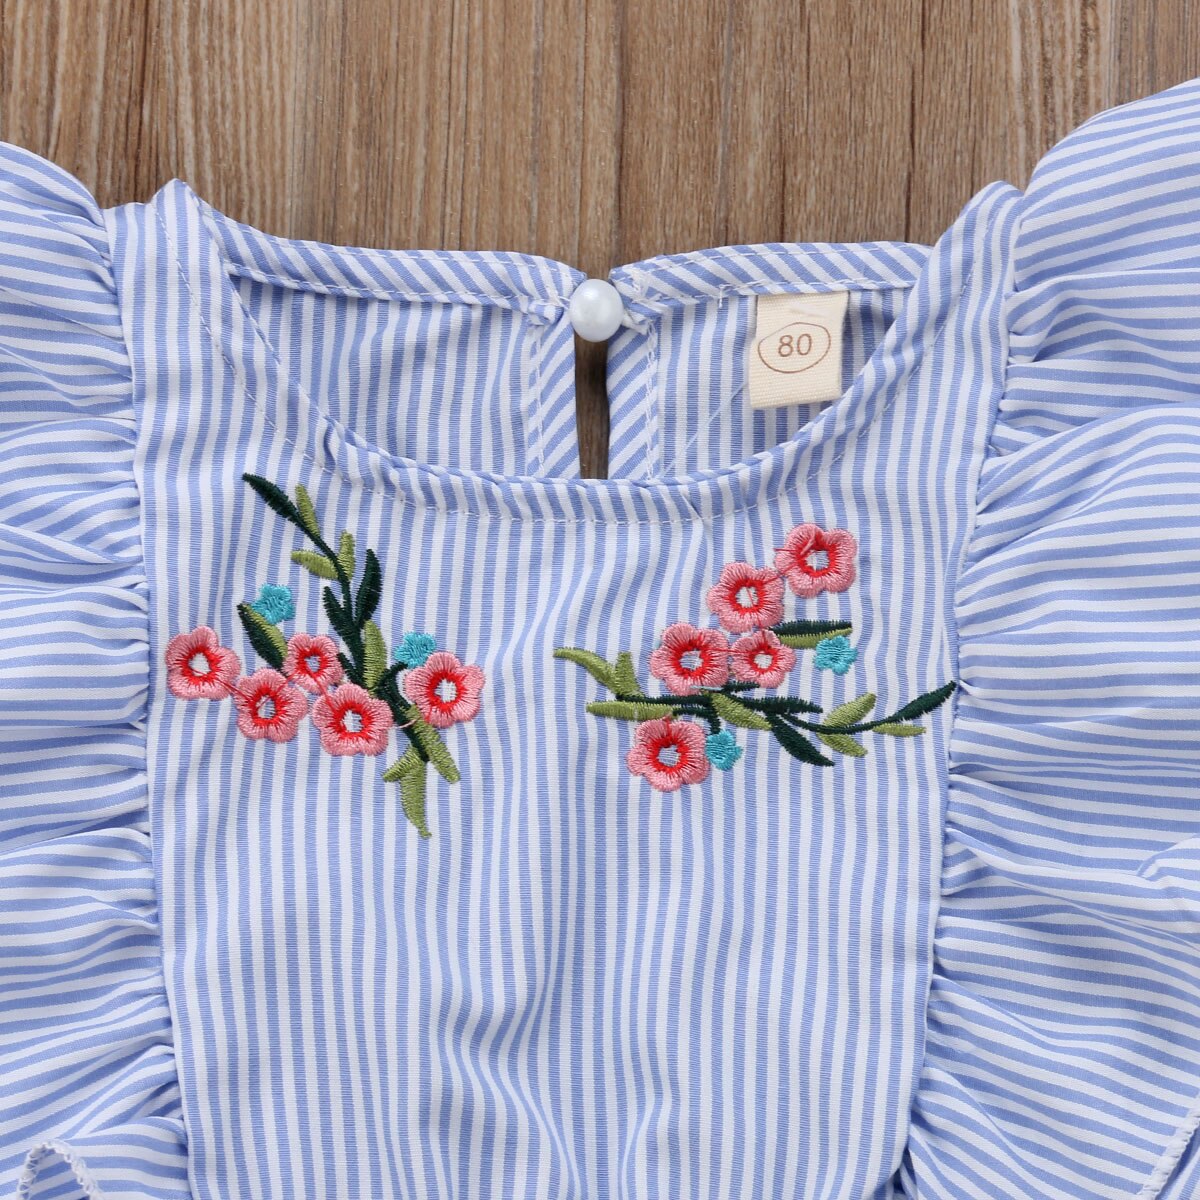 Toddler-Kids-Baby-Girl-Flower-Stripe-Ruffle-Romper-Jumpsuit-Outfits-Clothes-2